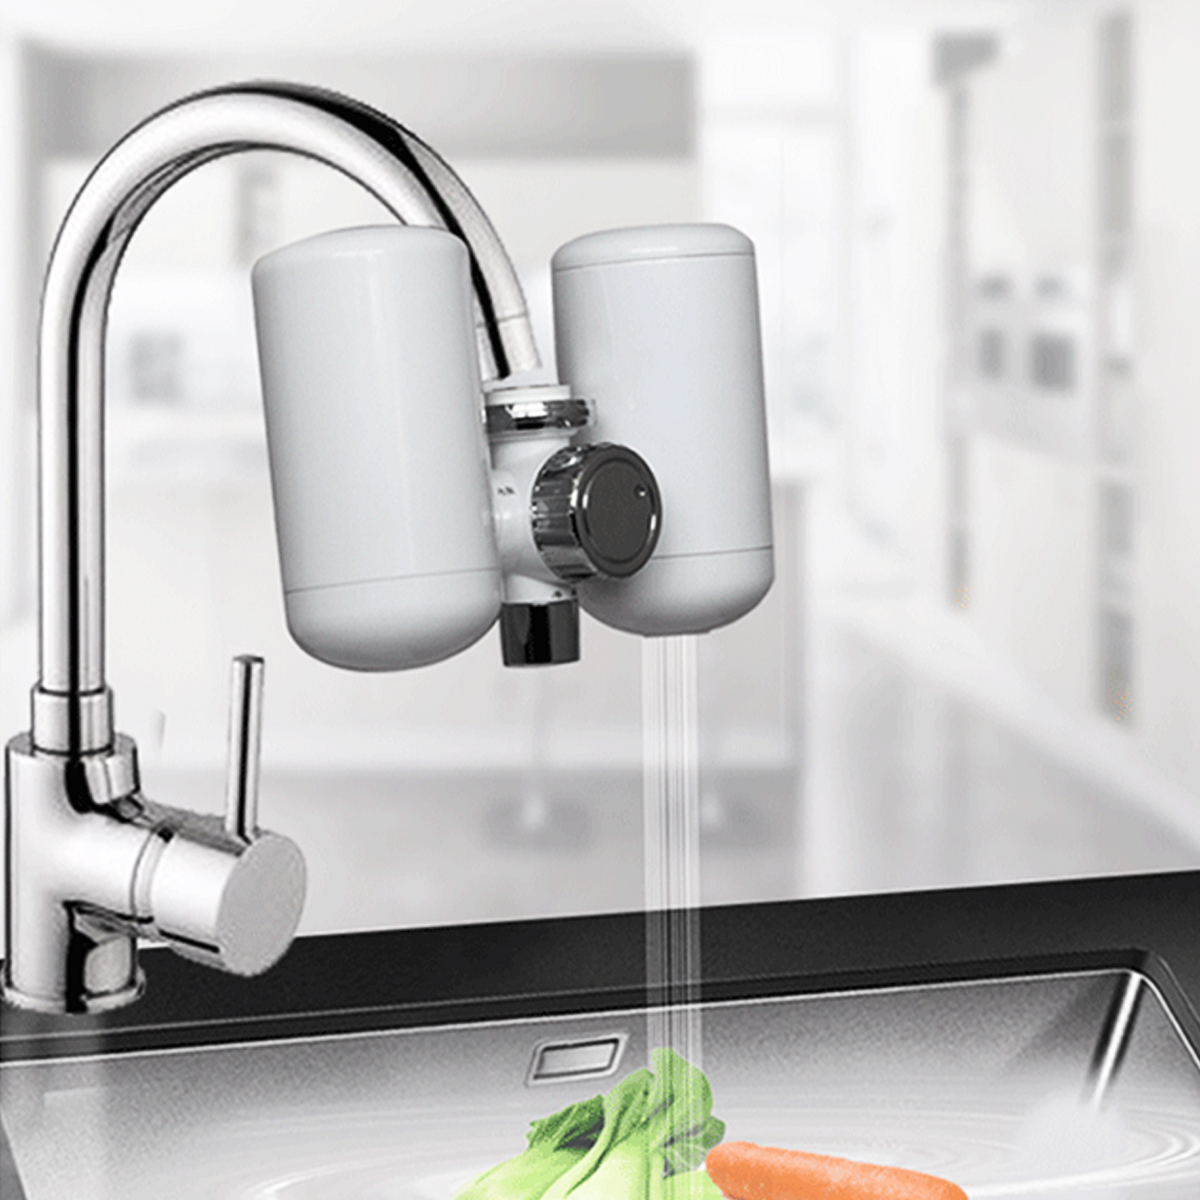 

3000W 220V Electric Instant Hot Water Heater Sink Faucet Kitchen Heating Tap Free Installation